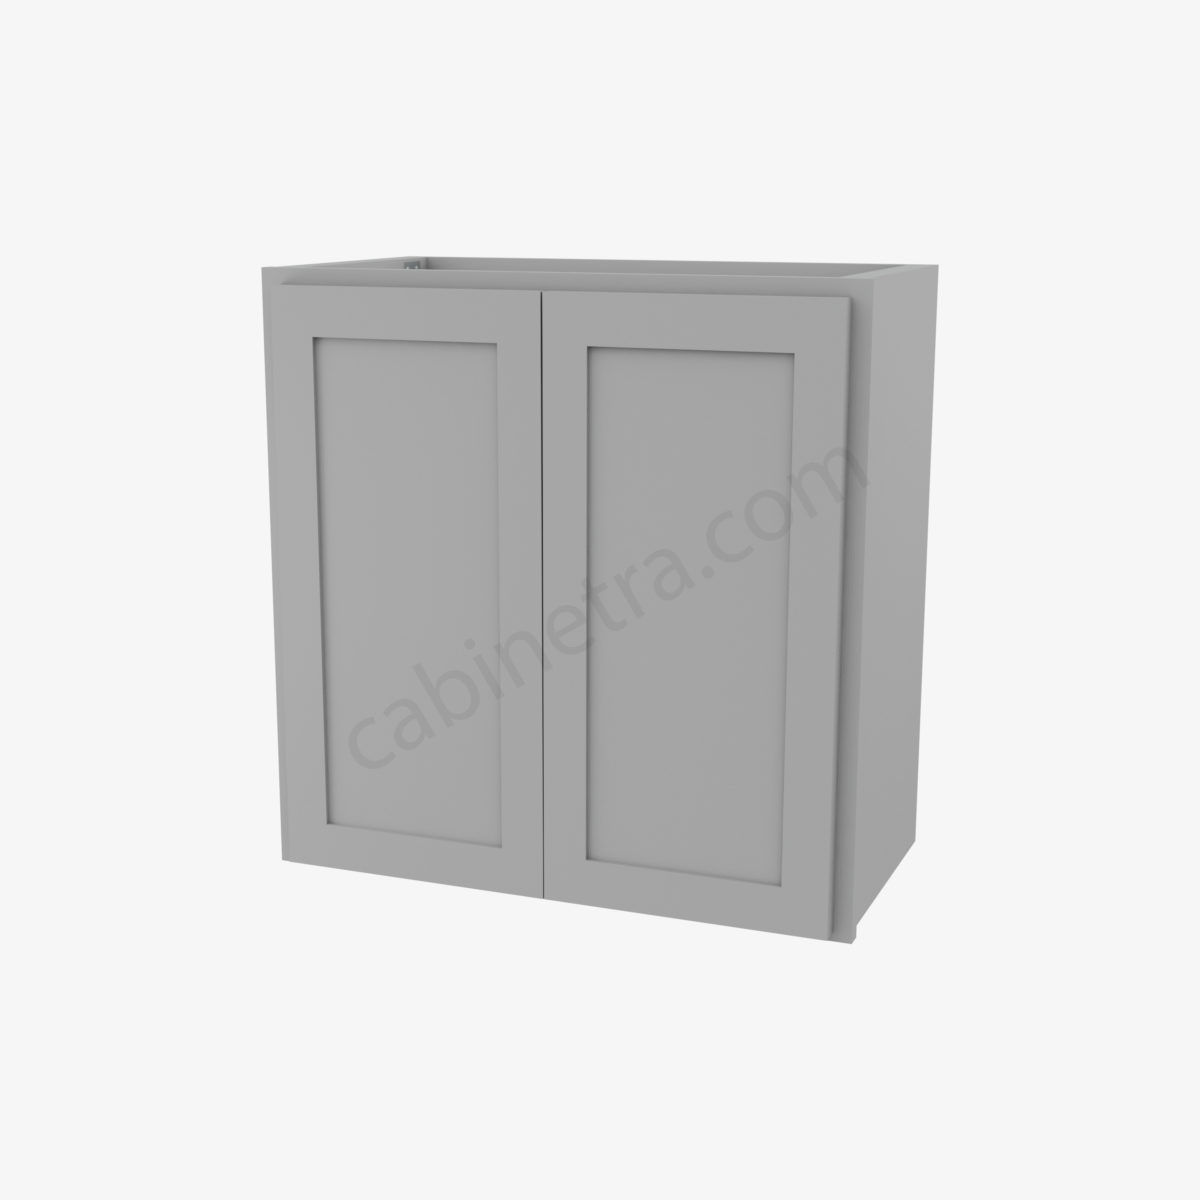 AB W2424B 0 Forevermark Lait Gray Shaker Cabinetra scaled